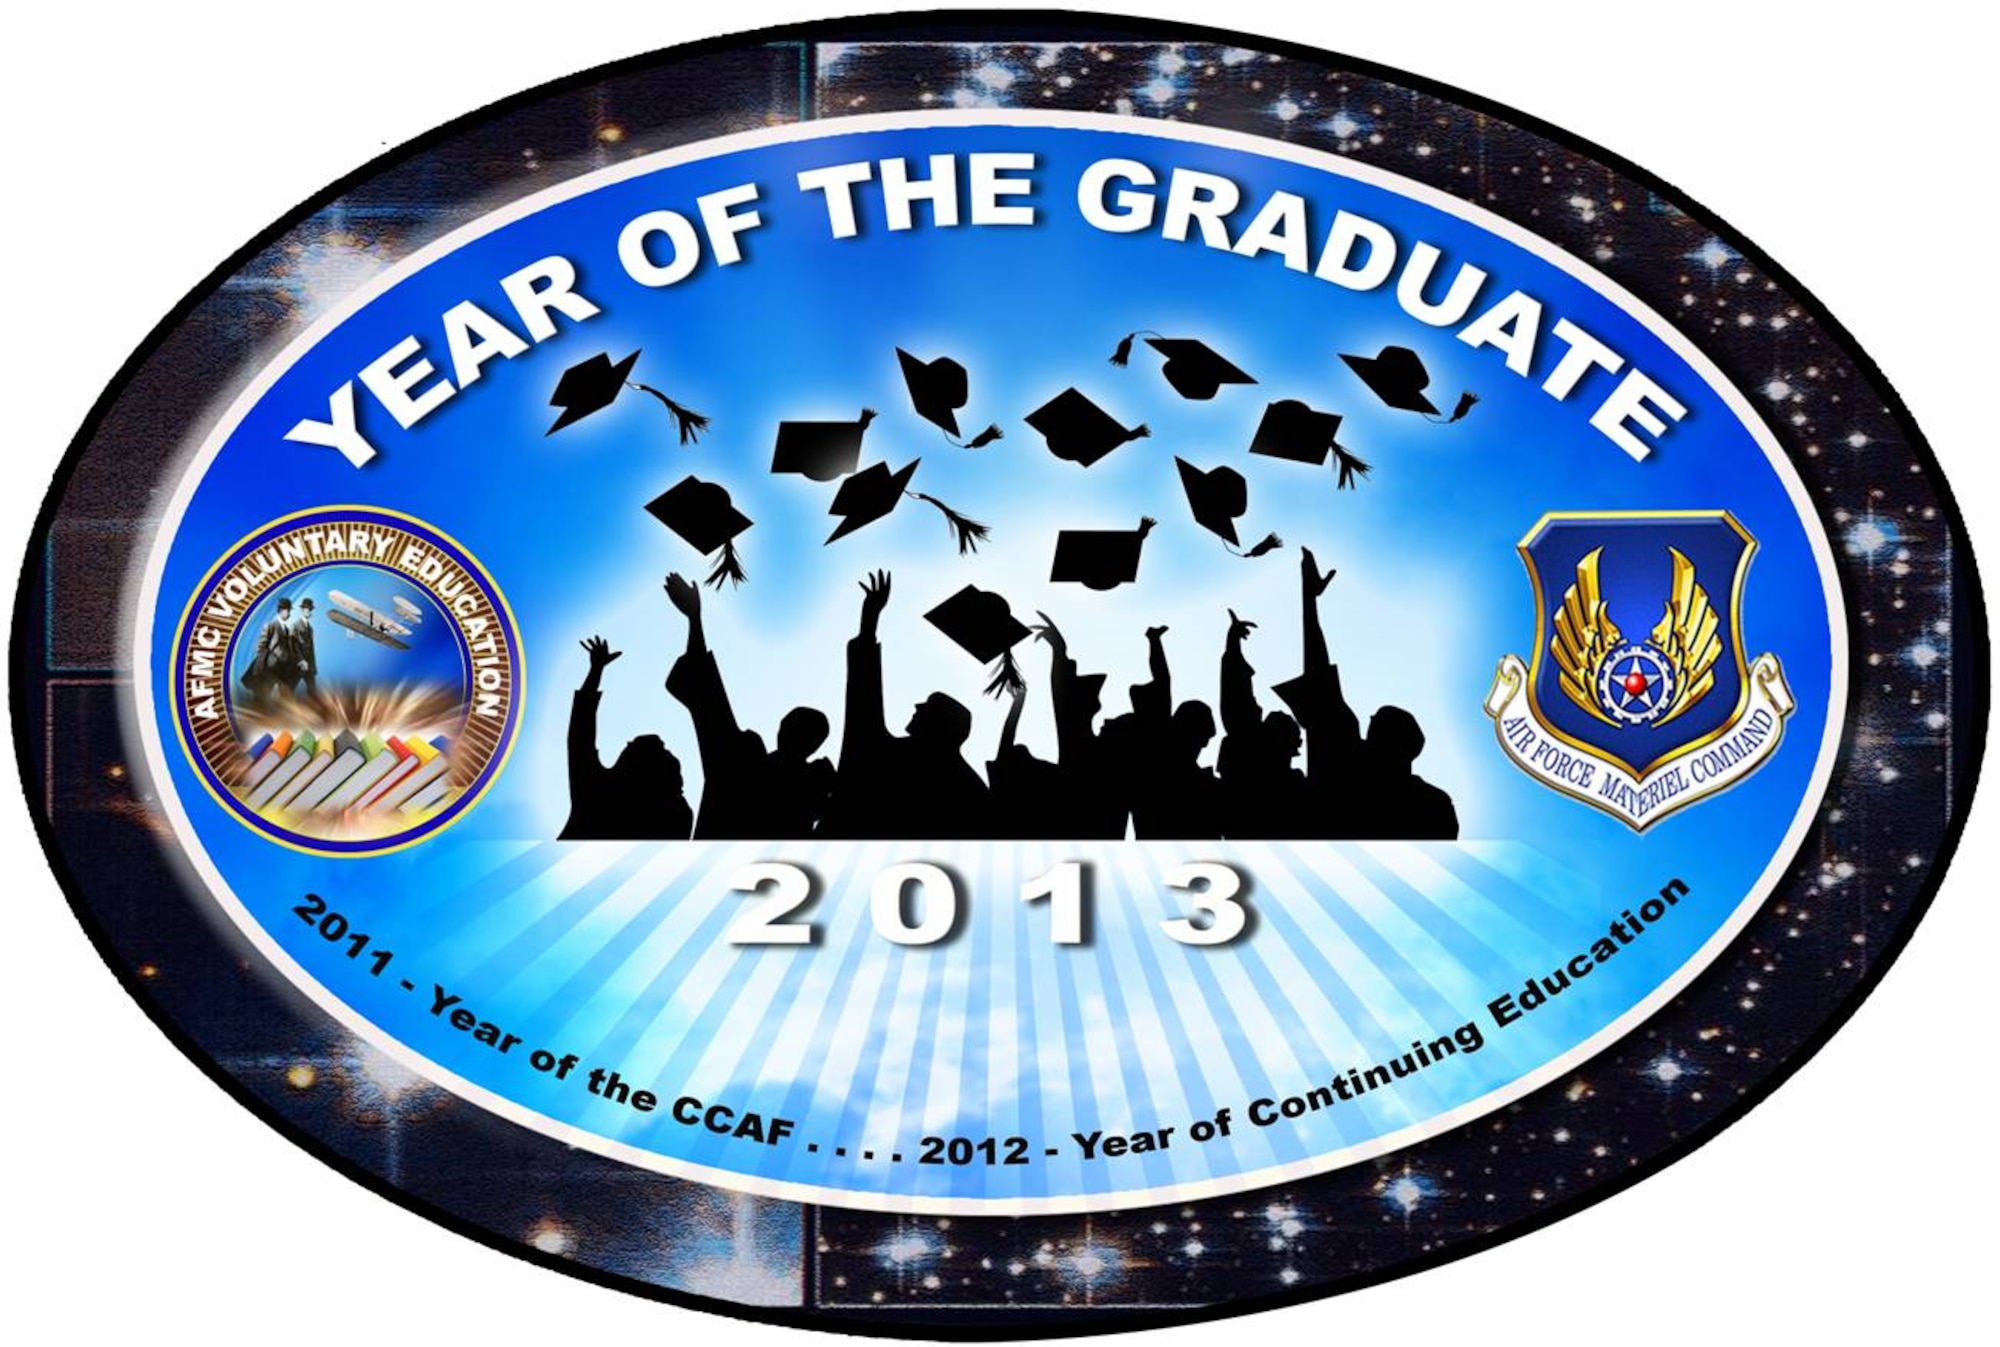 2013 is AFMC's Year of the Graduate. (U.S. Air Force graphic)